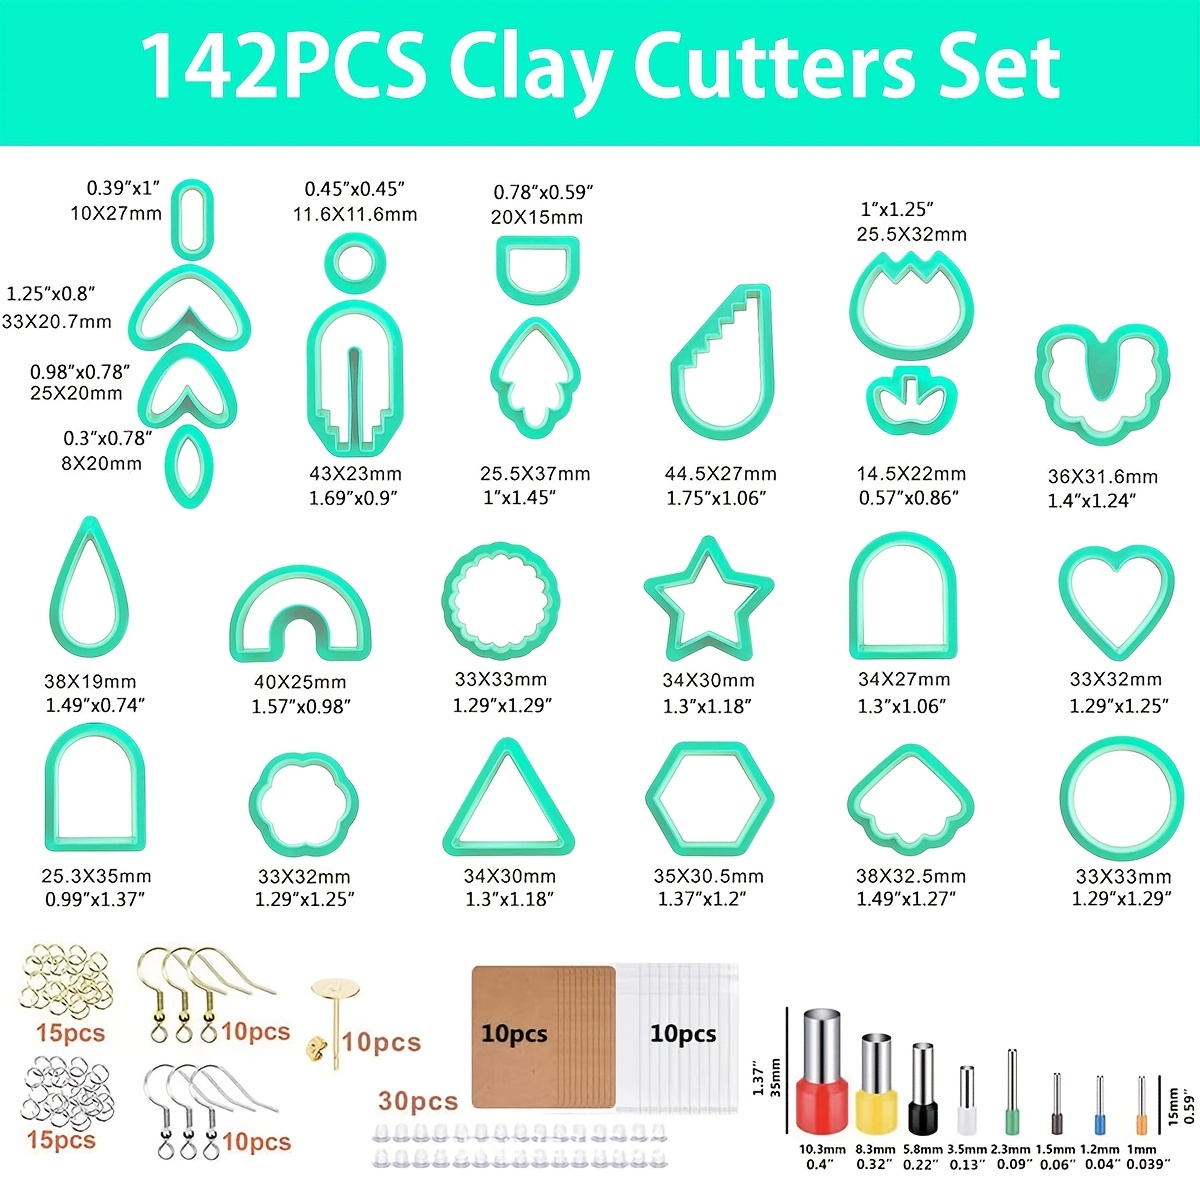 PTFJZ Polymer Clay Cutters for Earring Making - 160pcs Clay Tools Set with  Earrings Accessories, 42+8pcs Different Shape Plastic Clay Molds Clay